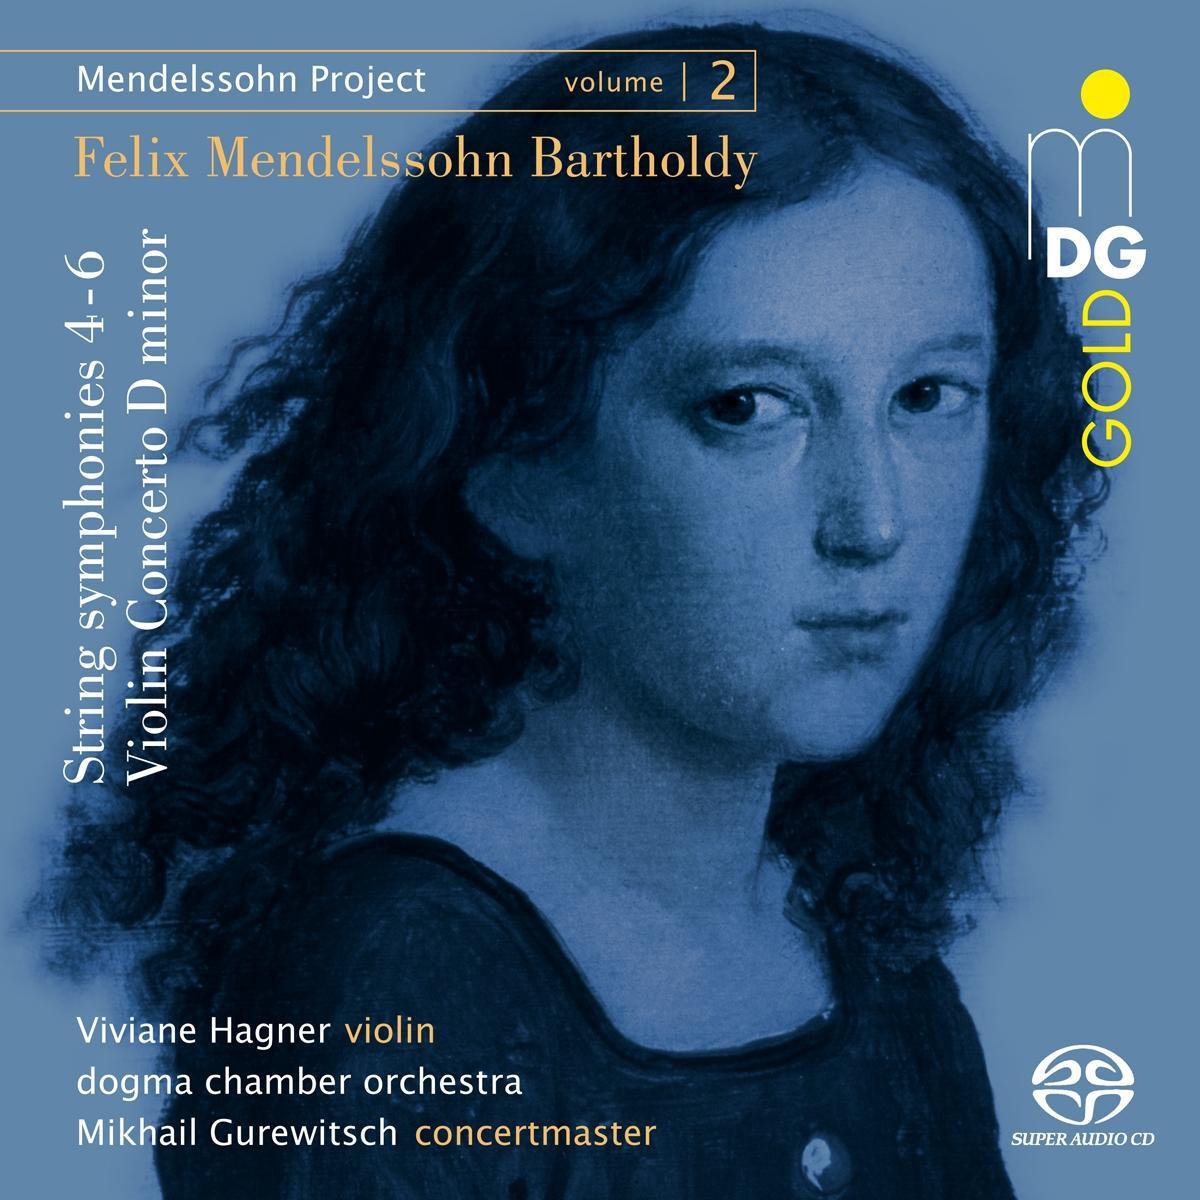 Afbeelding van product Outhere  Mendelssohn Project Vol. 2 - String Symphonies 4, (Super Audio CD)  - Viviane Hagner - Dogma Chamber Orchestra - Mikhail